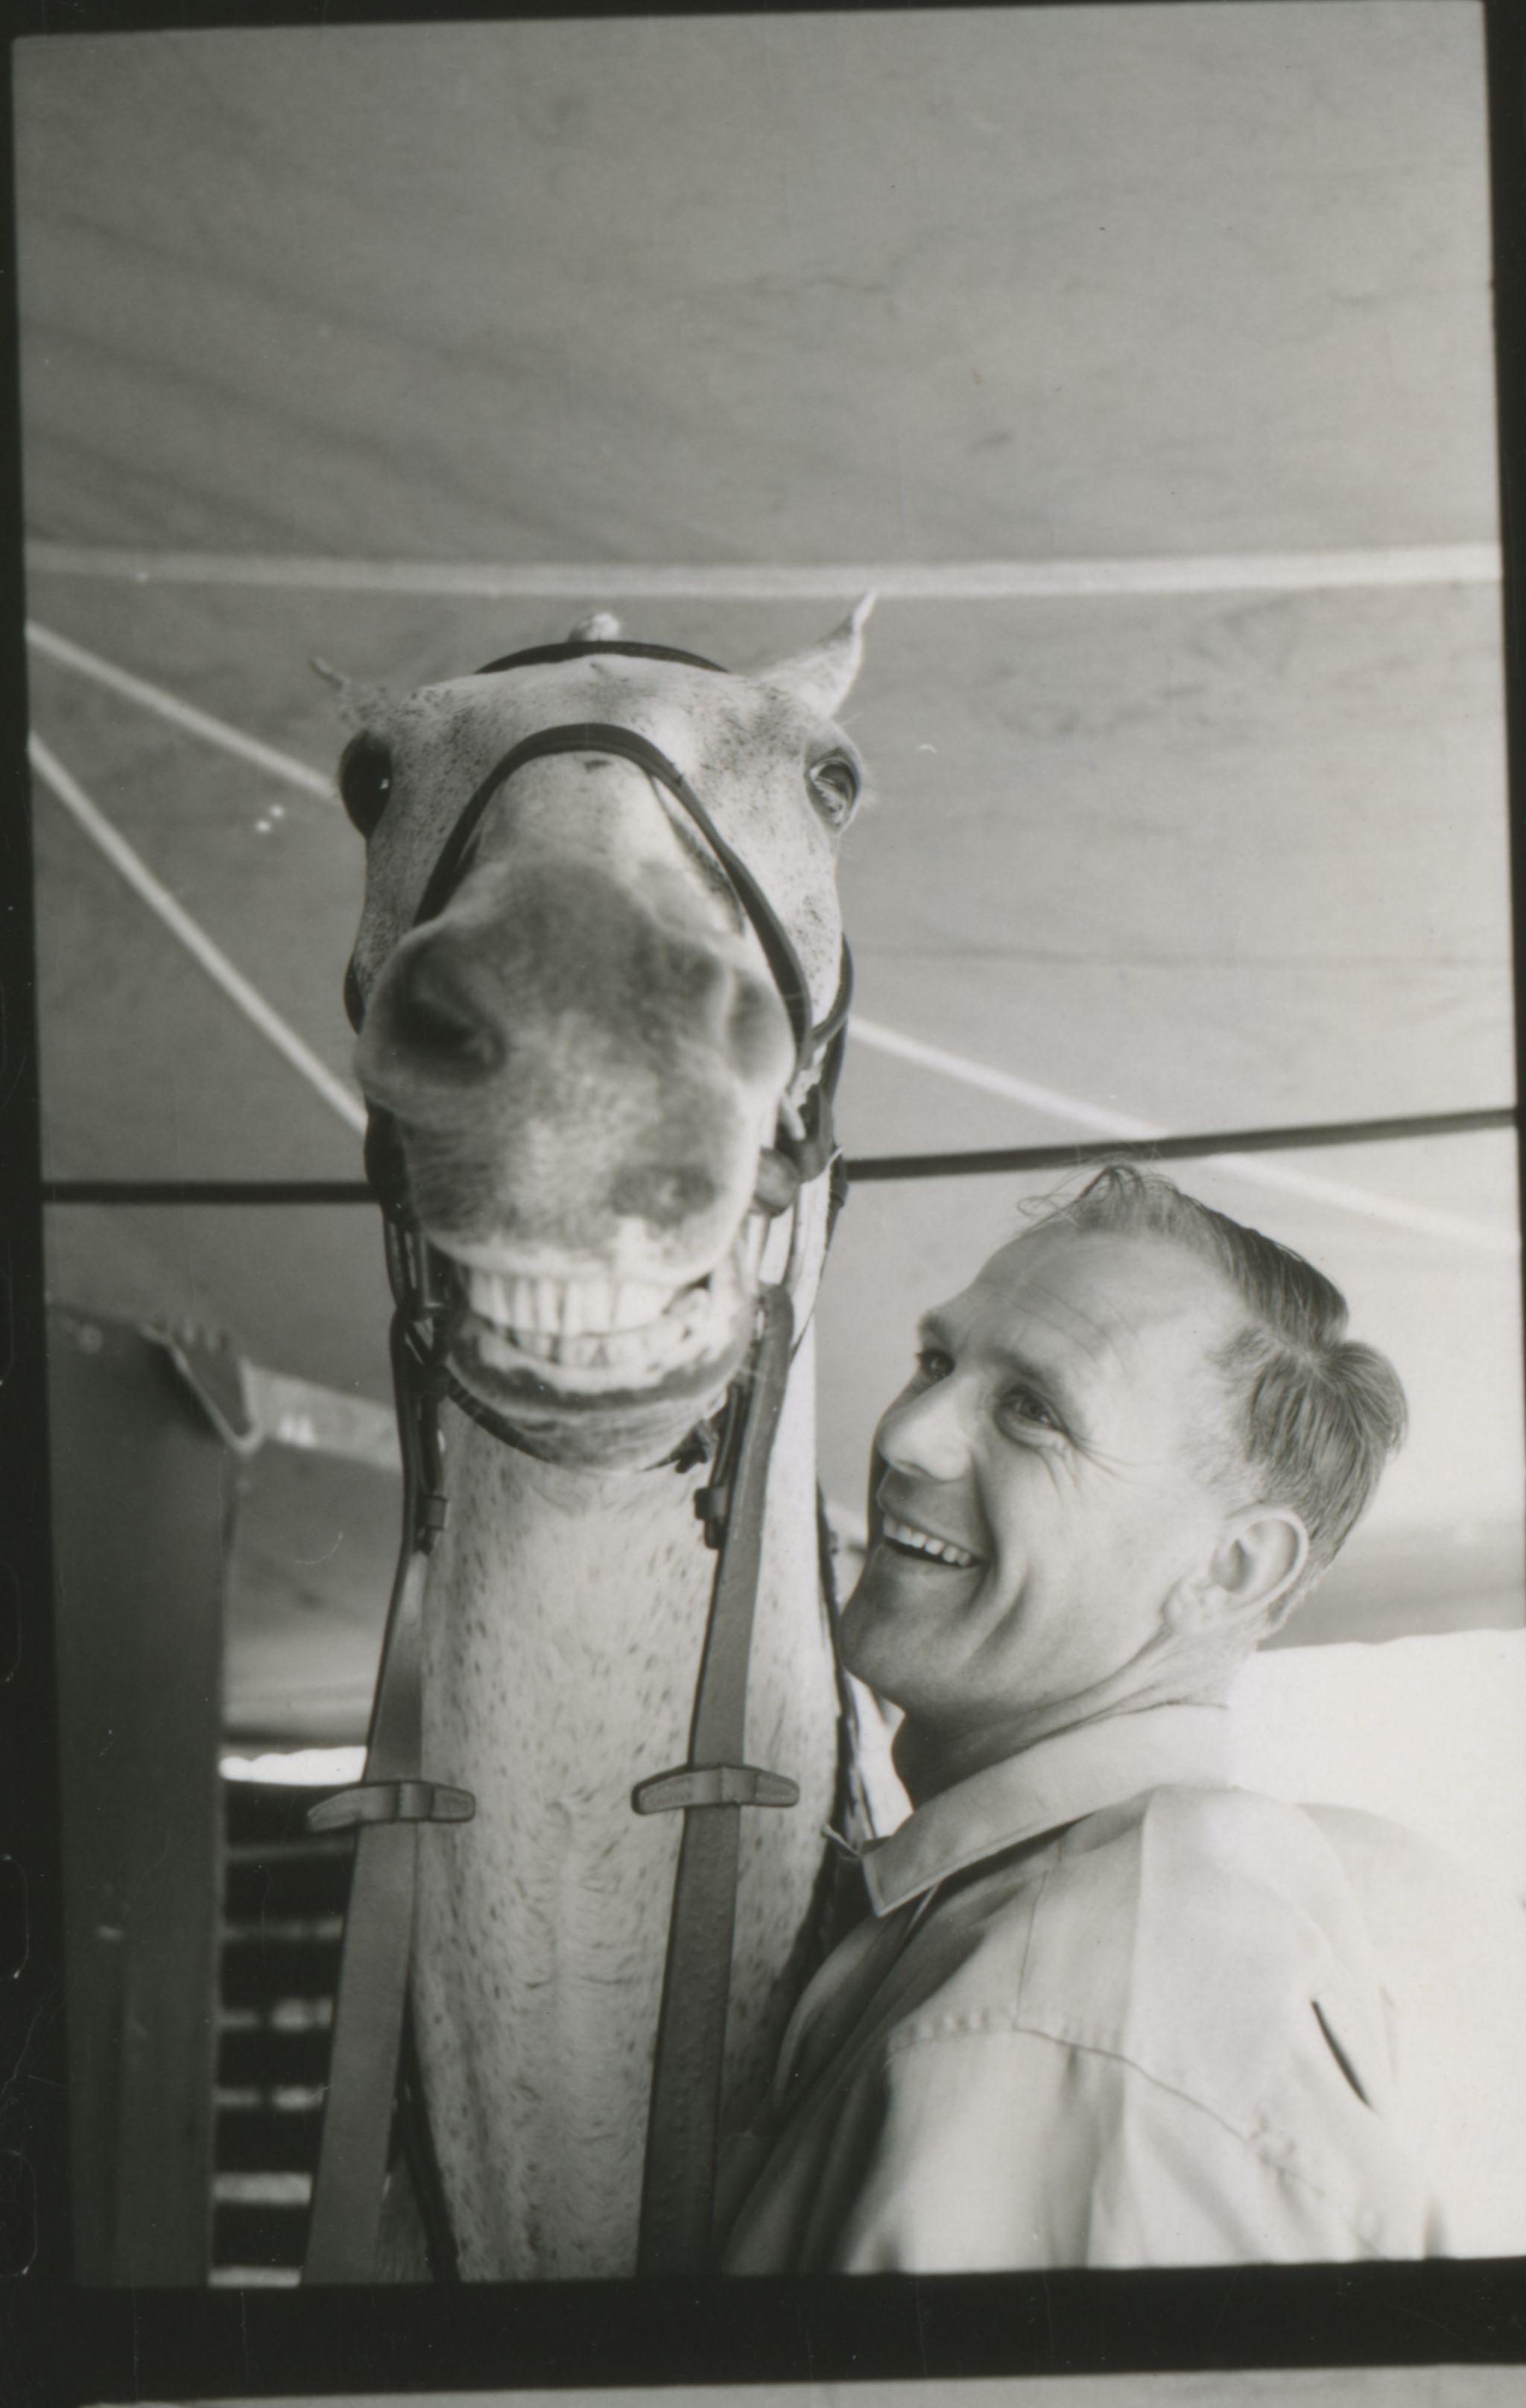 ‘Harry & Snowman’: Story of a man and his exceptional horse | The